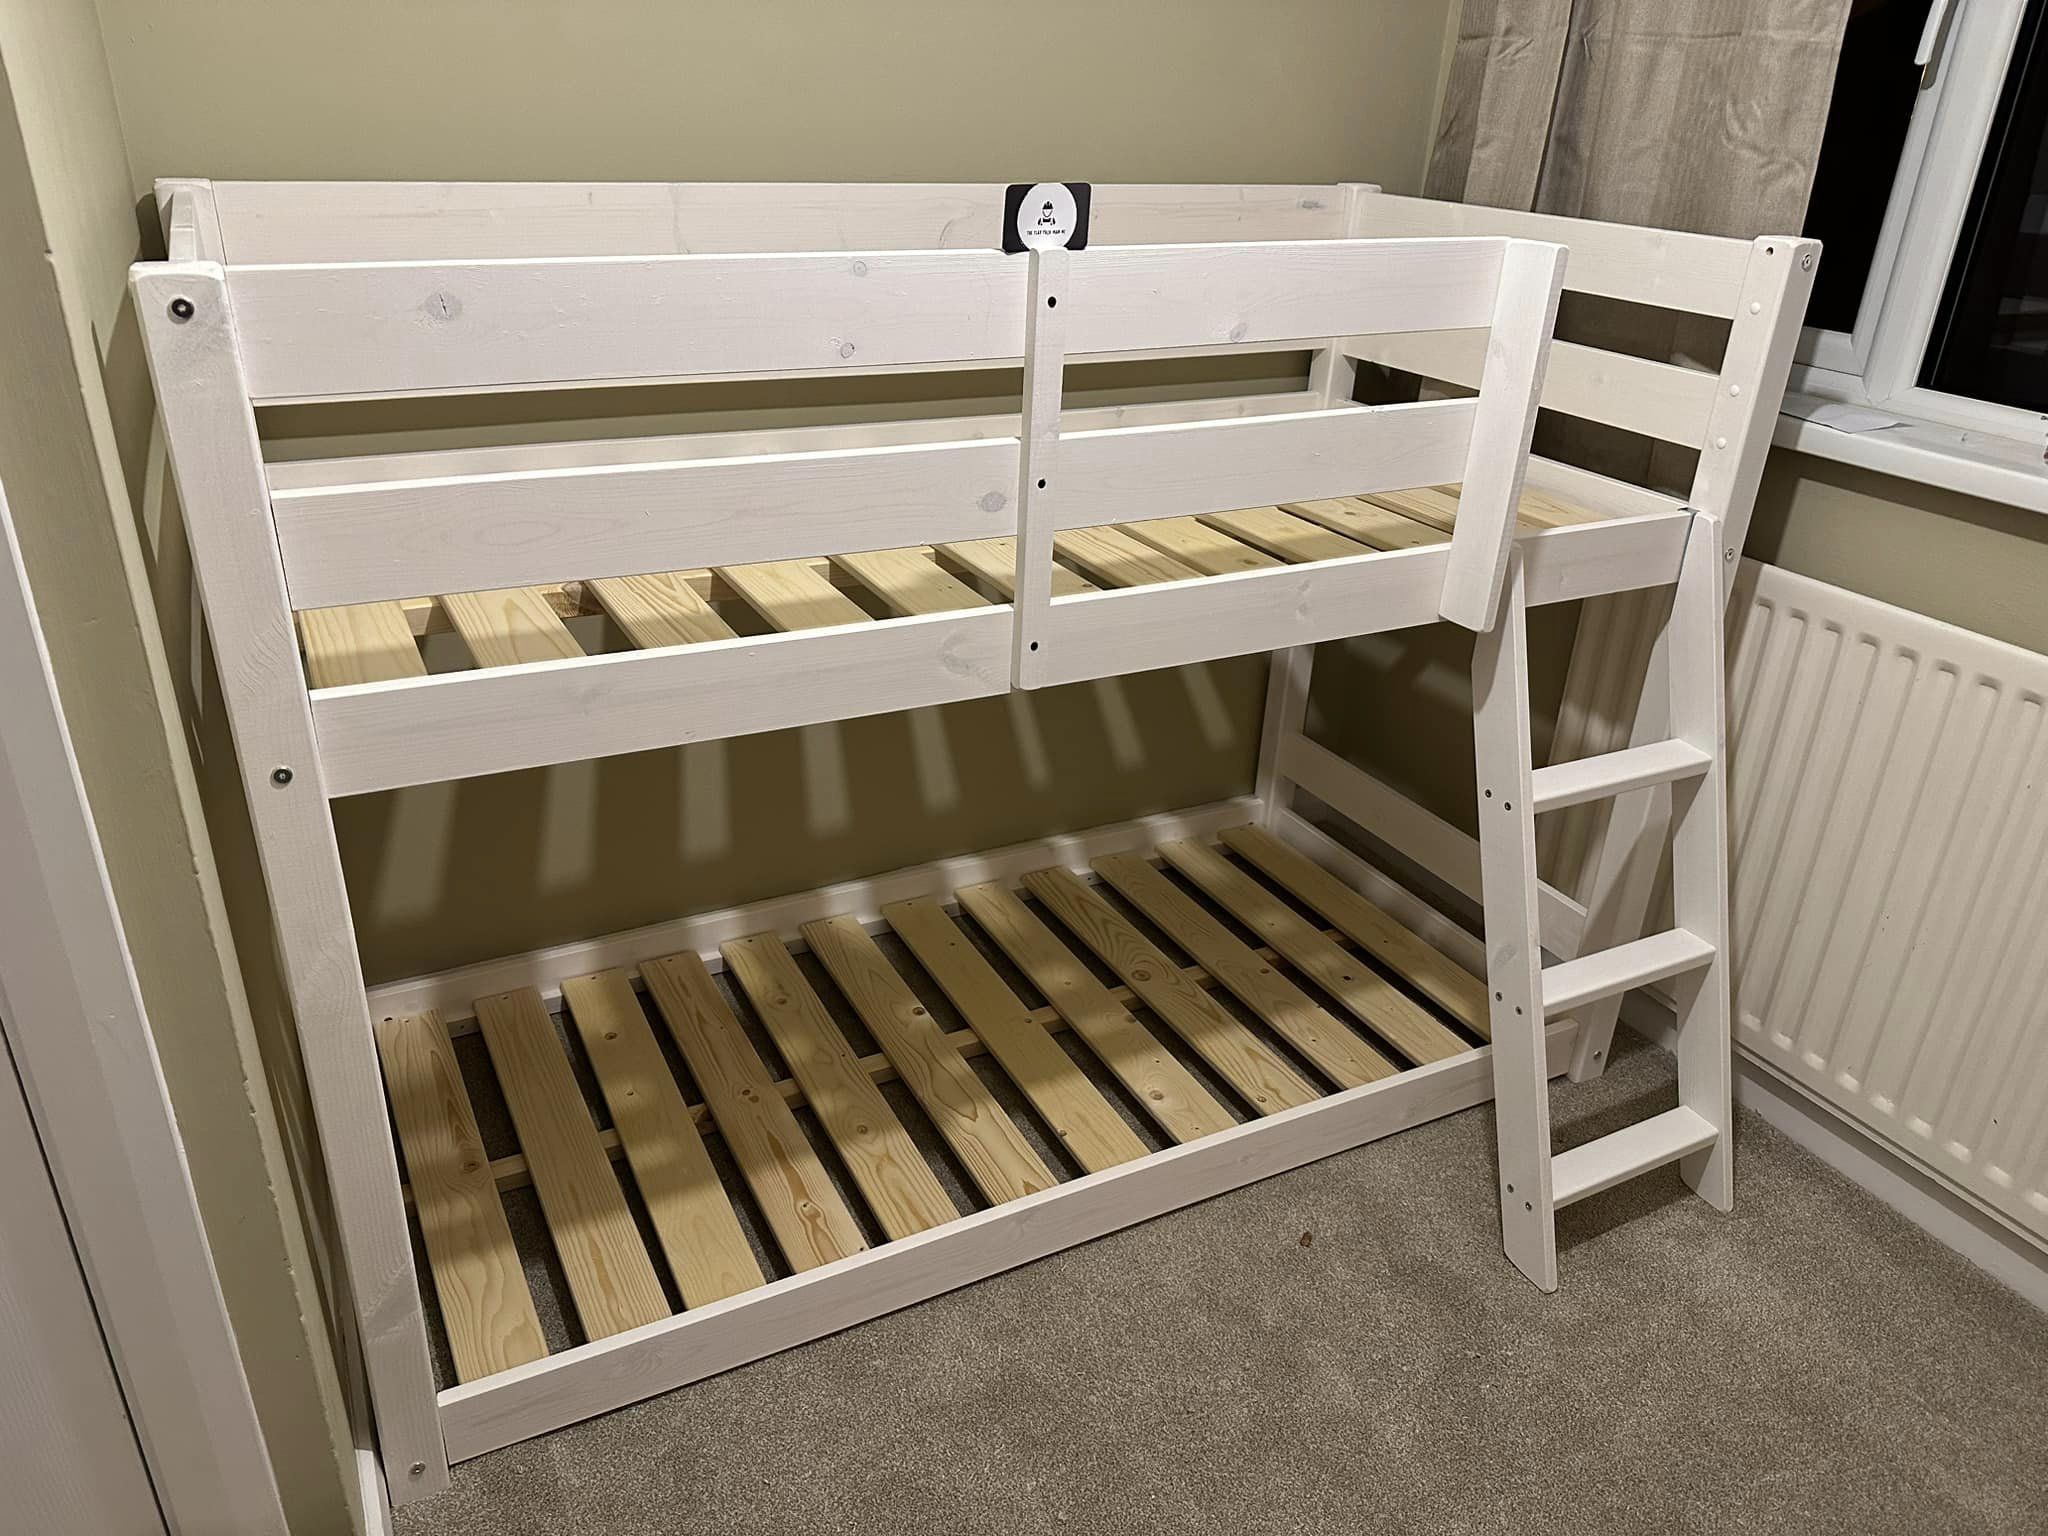 Single kids bunk bed in white wood